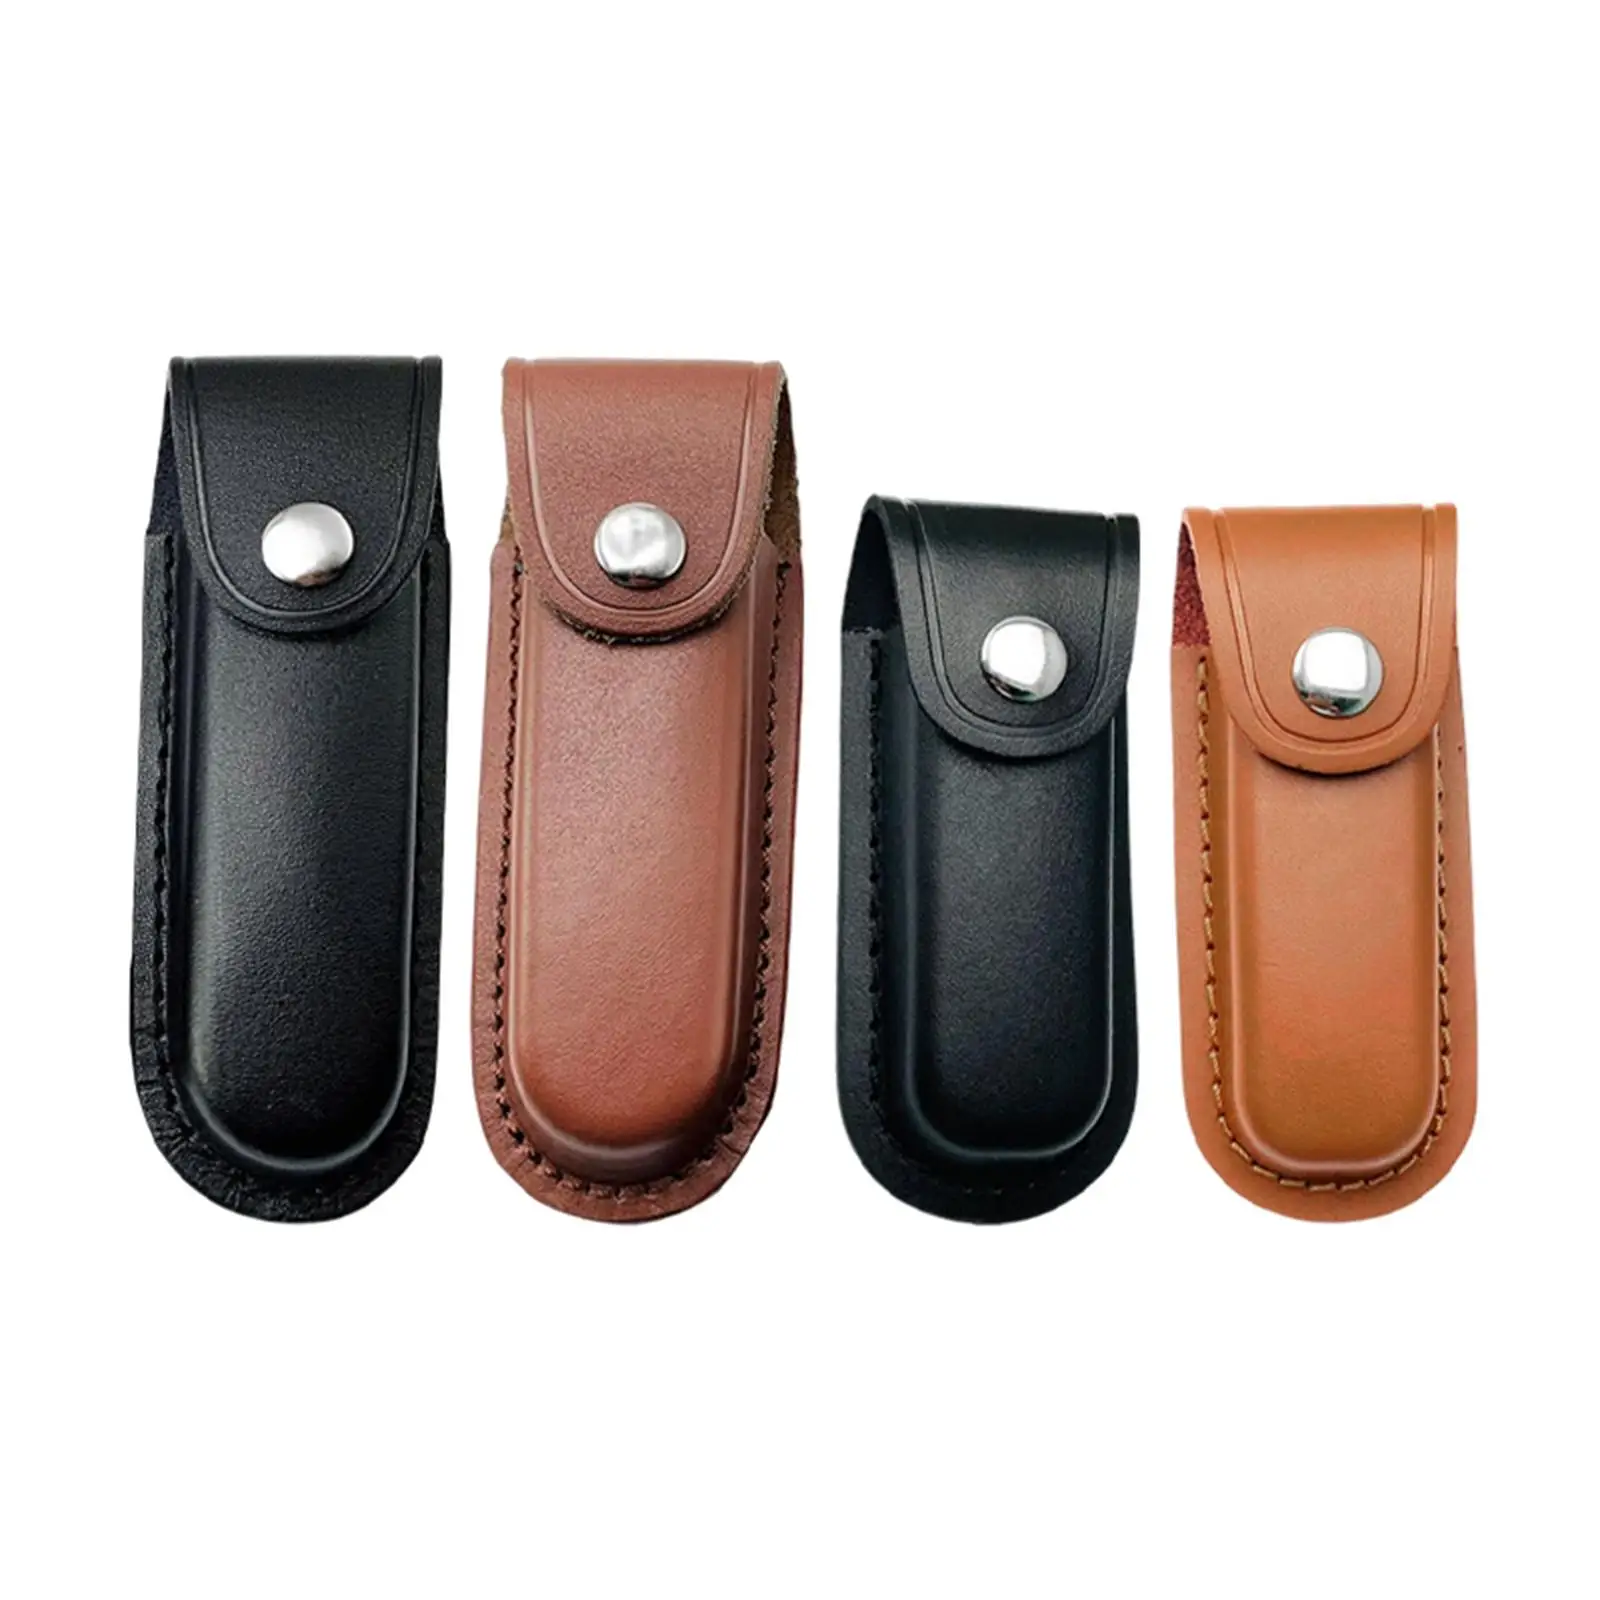 Leather Foldable Knives Hunting Holster Hiking Hunting Use for Pocket Knife Small Knife Belt Loop Design Easily Attach On Belt